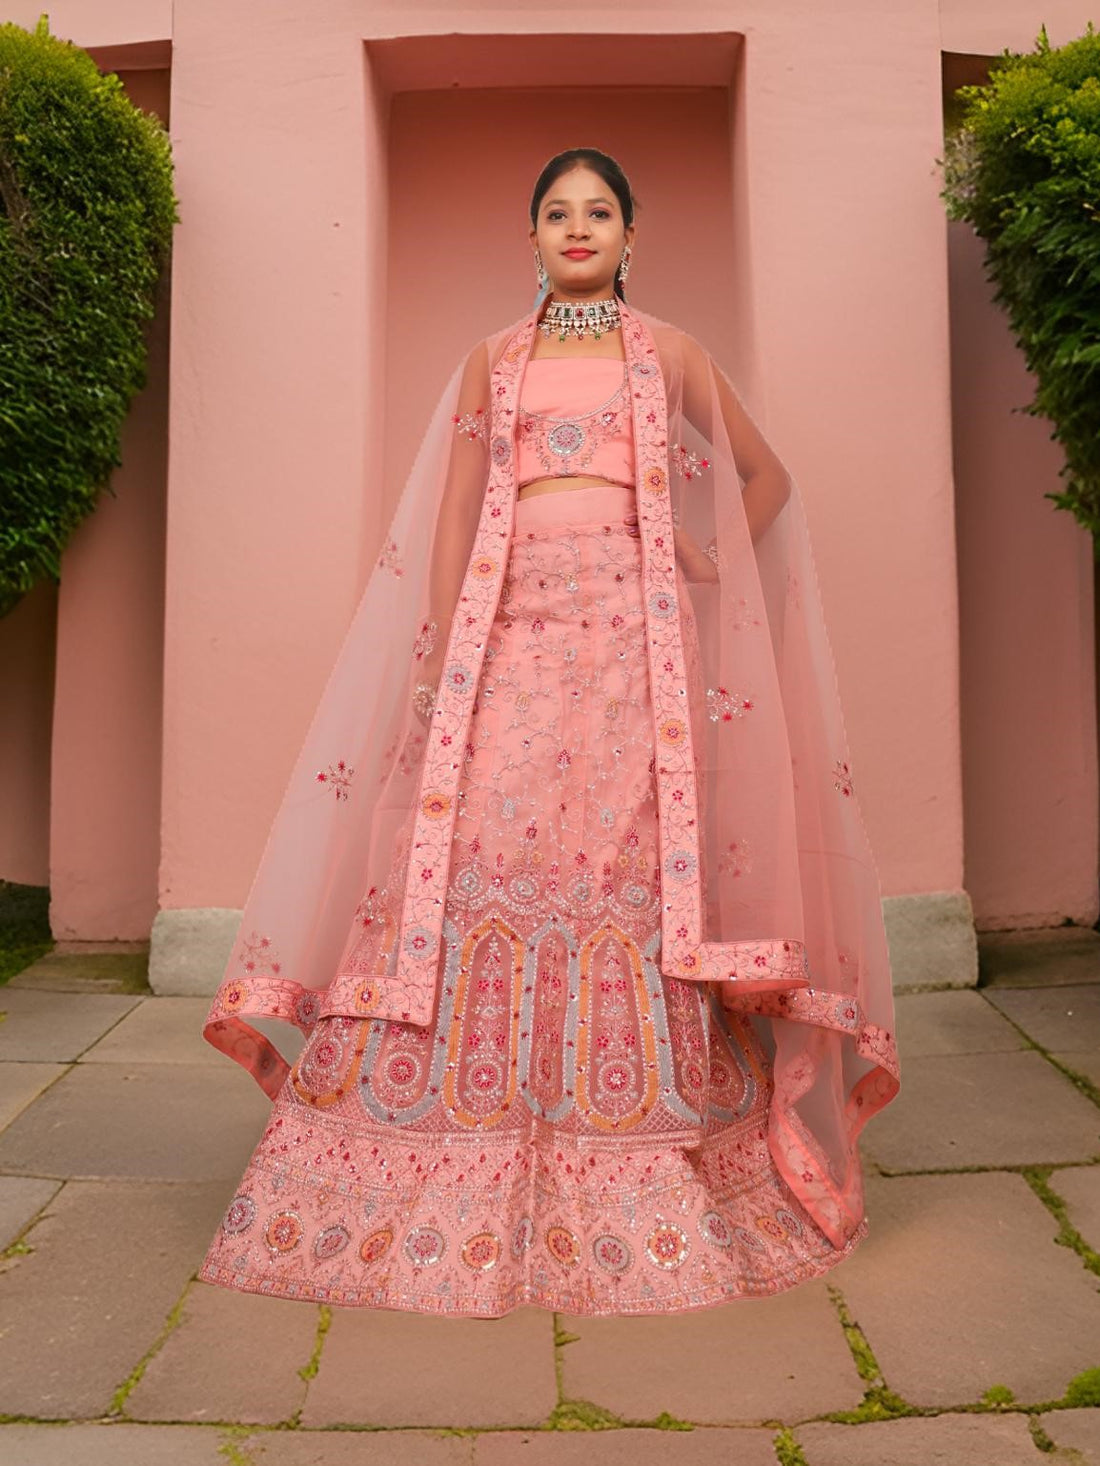 Semi-Stitched Lehenga with Embroidery &amp; Zari Thread Work by Shreekama Baby Pink Semi-Stitched Lehenga for Party Festival Wedding Occasion in Noida